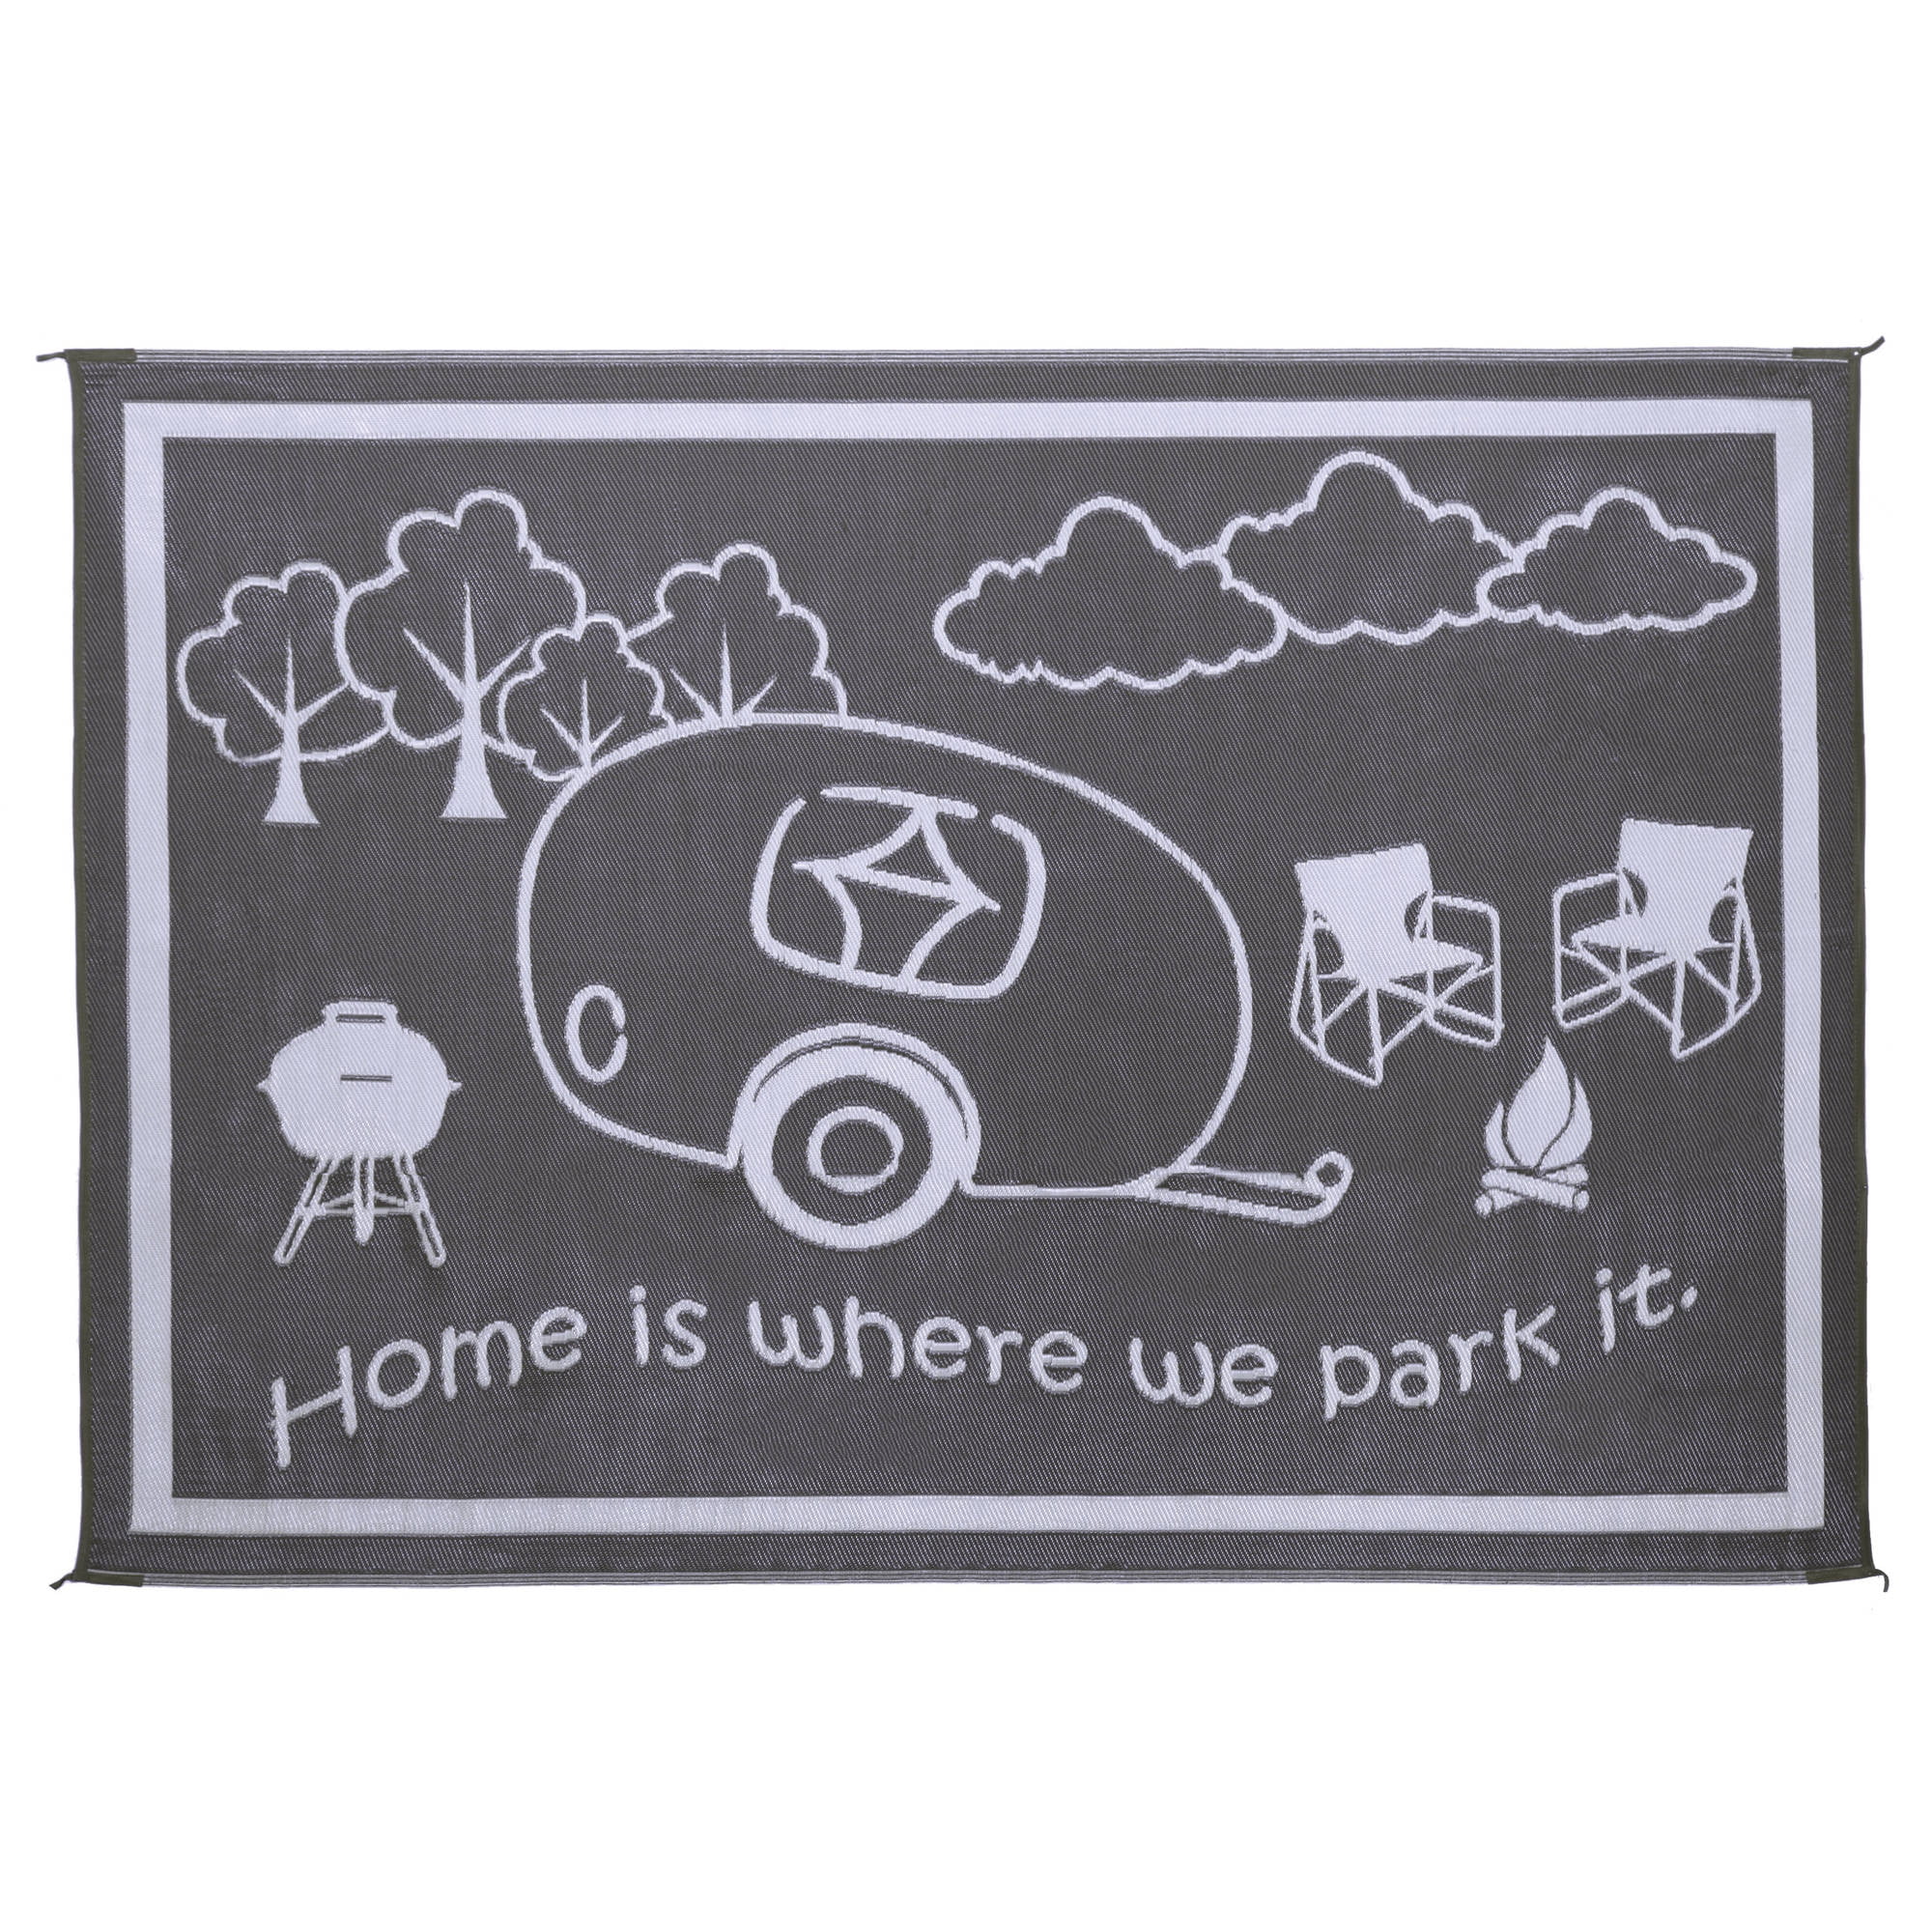 Mingnei Welcome to Camp Quitcherb**Chin Camper Doormat Door Mat for Rv Home  Entrance, Camping Floor Mats for House Front Indoor Inside Outdoor Outside